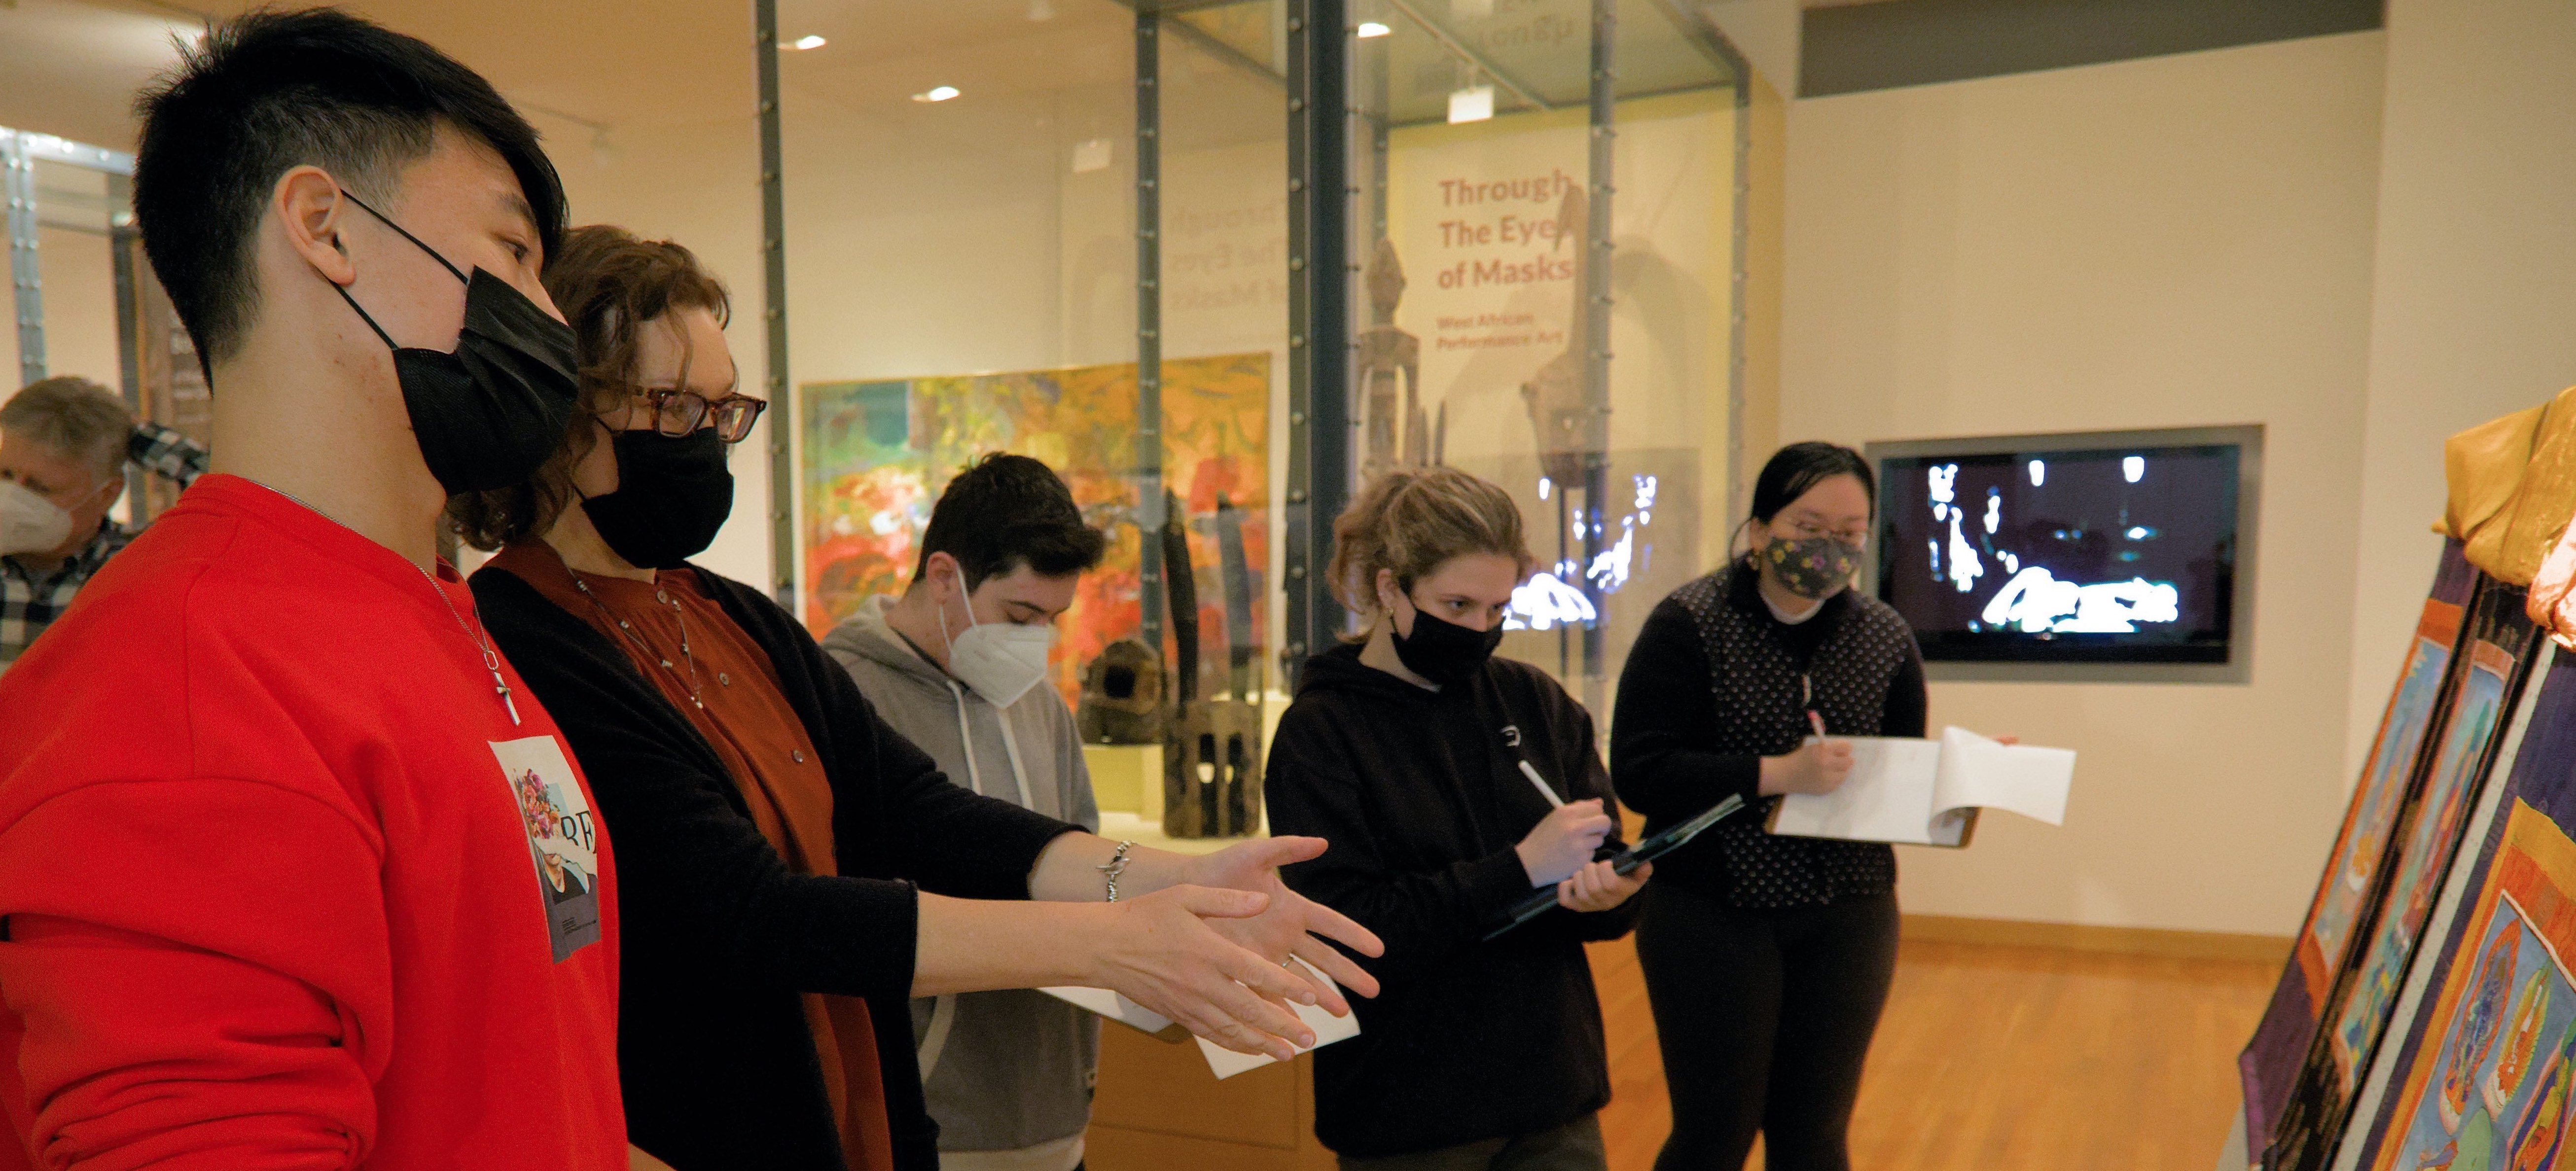 Students in Dr. Annabella Pitkin's class examine Buddhist artworks in the Lower Gallery